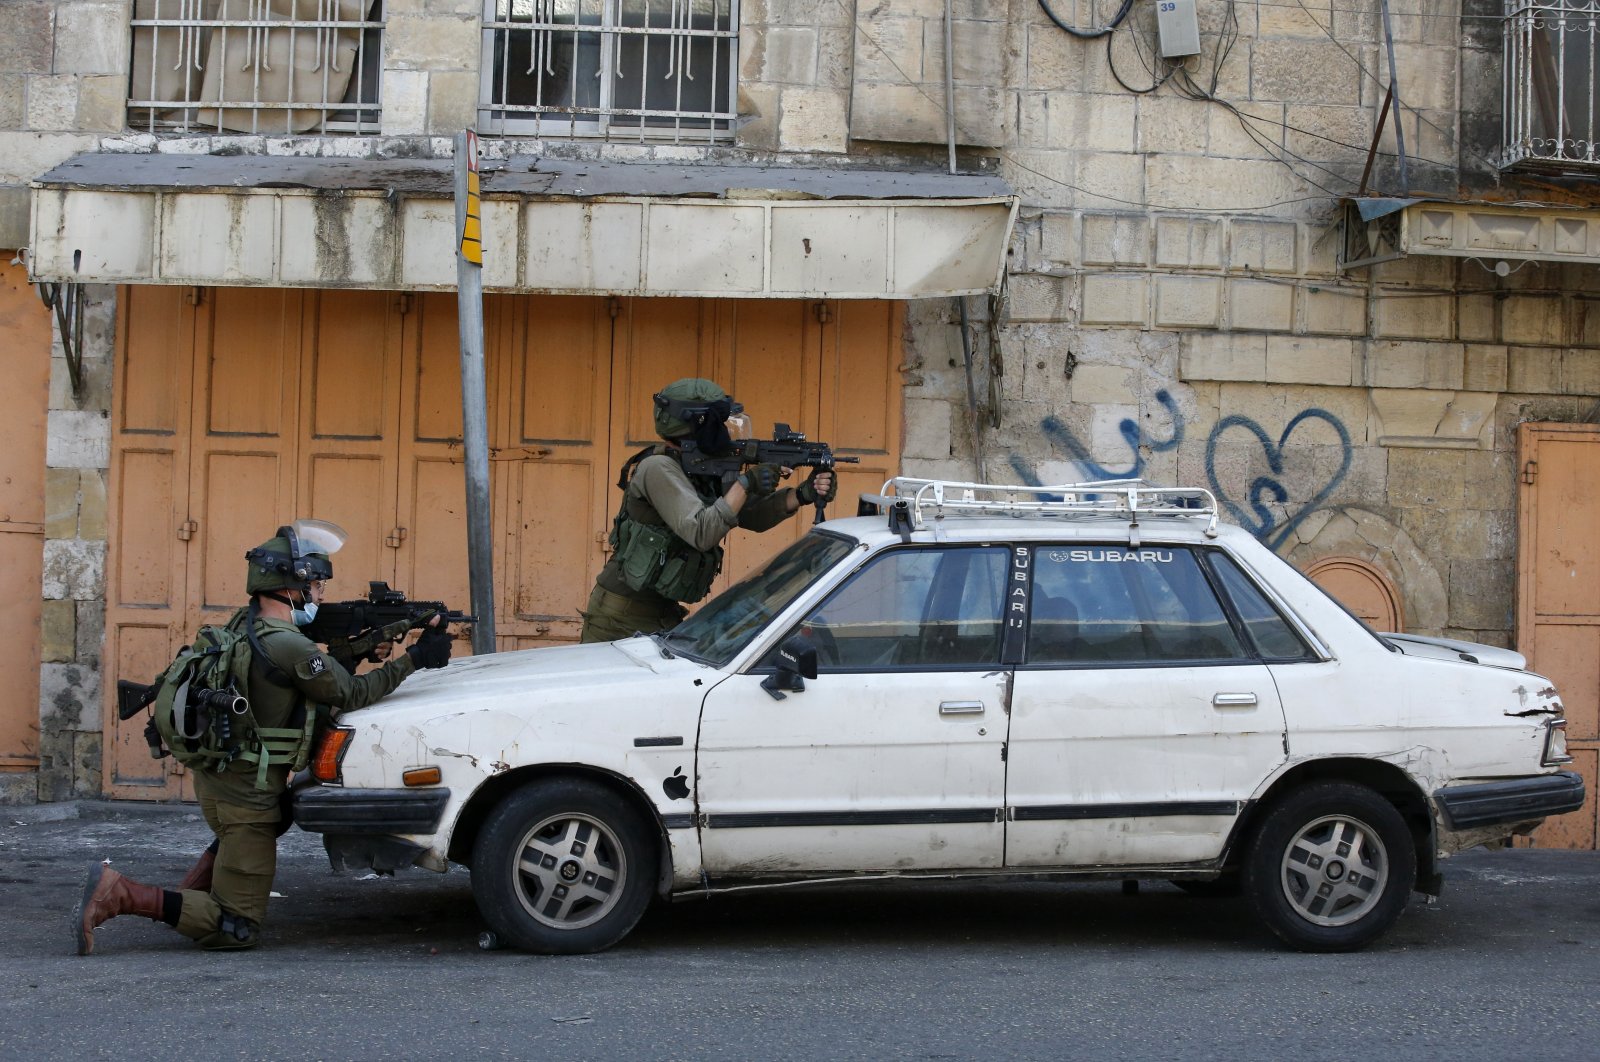 Israeli security forces aim their weapons amid clashes with Palestinian protesters in the Israeli-occupied West Bank town of Hebron, Sept. 25, 2020. (AFP Photo)